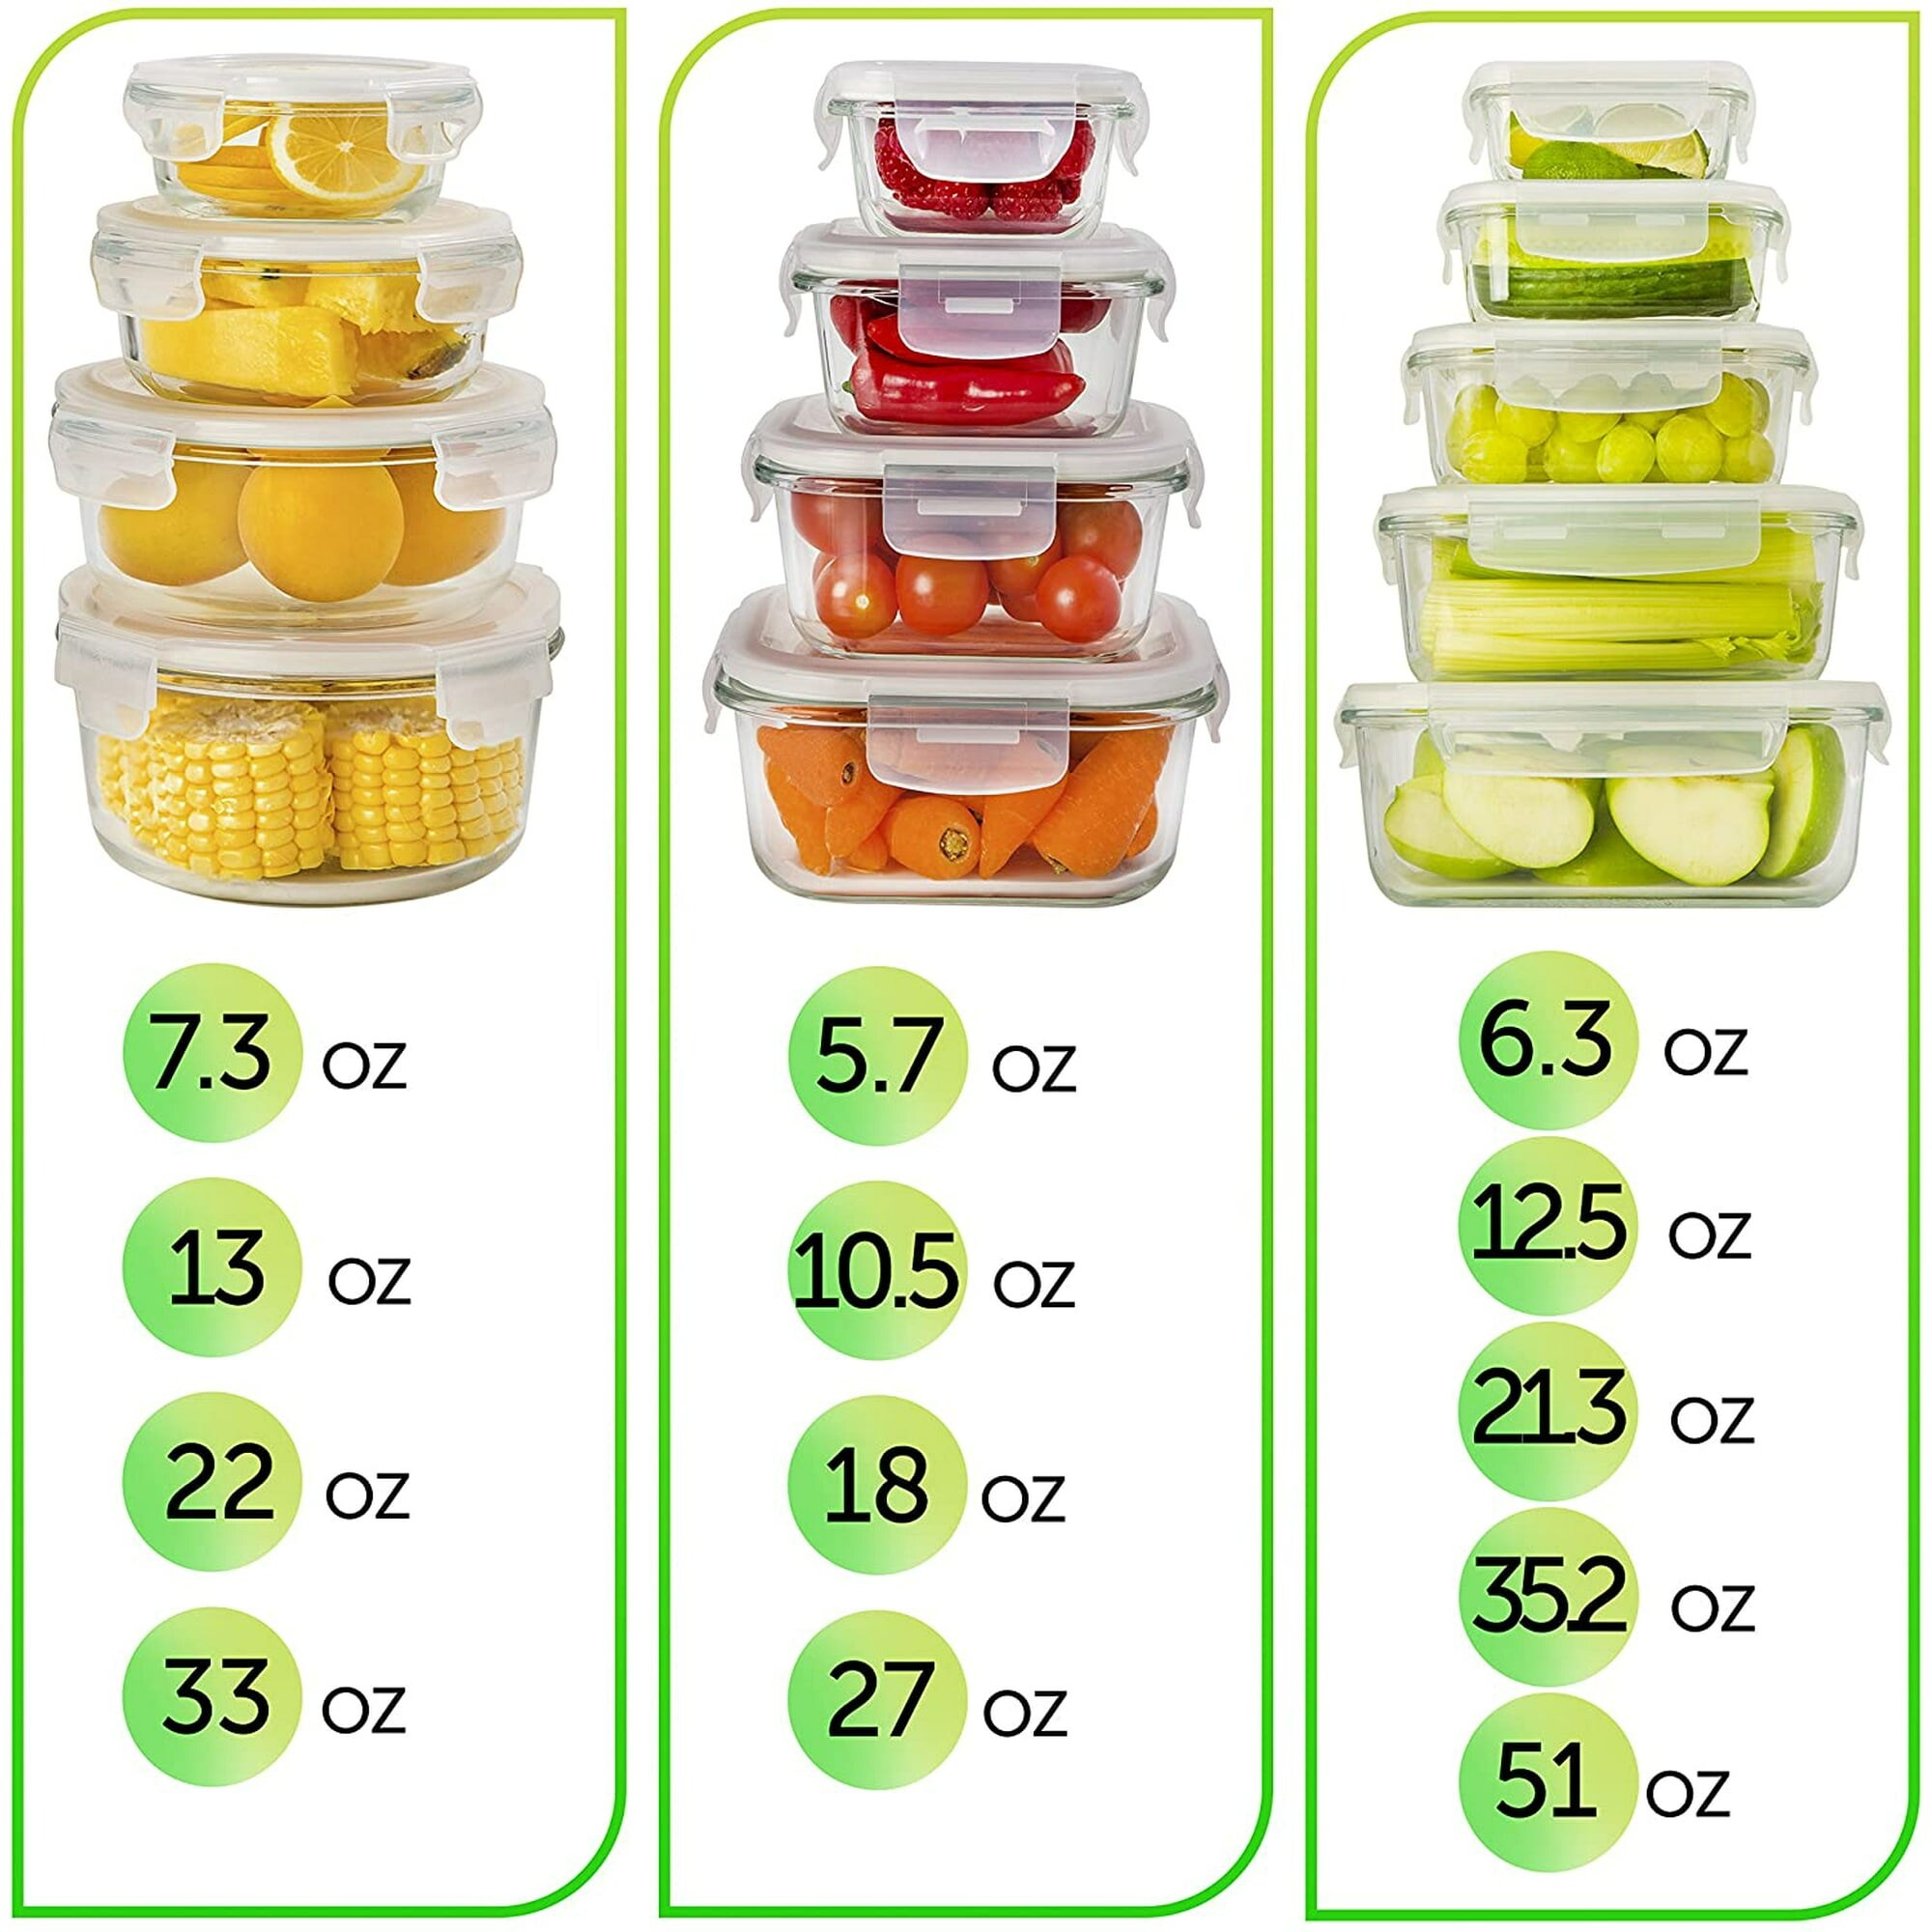 https://ak1.ostkcdn.com/images/products/is/images/direct/1ce17ff06cf76adf30d5235b47663811fa6d4a4a/Glass-food-storage-containers.jpg